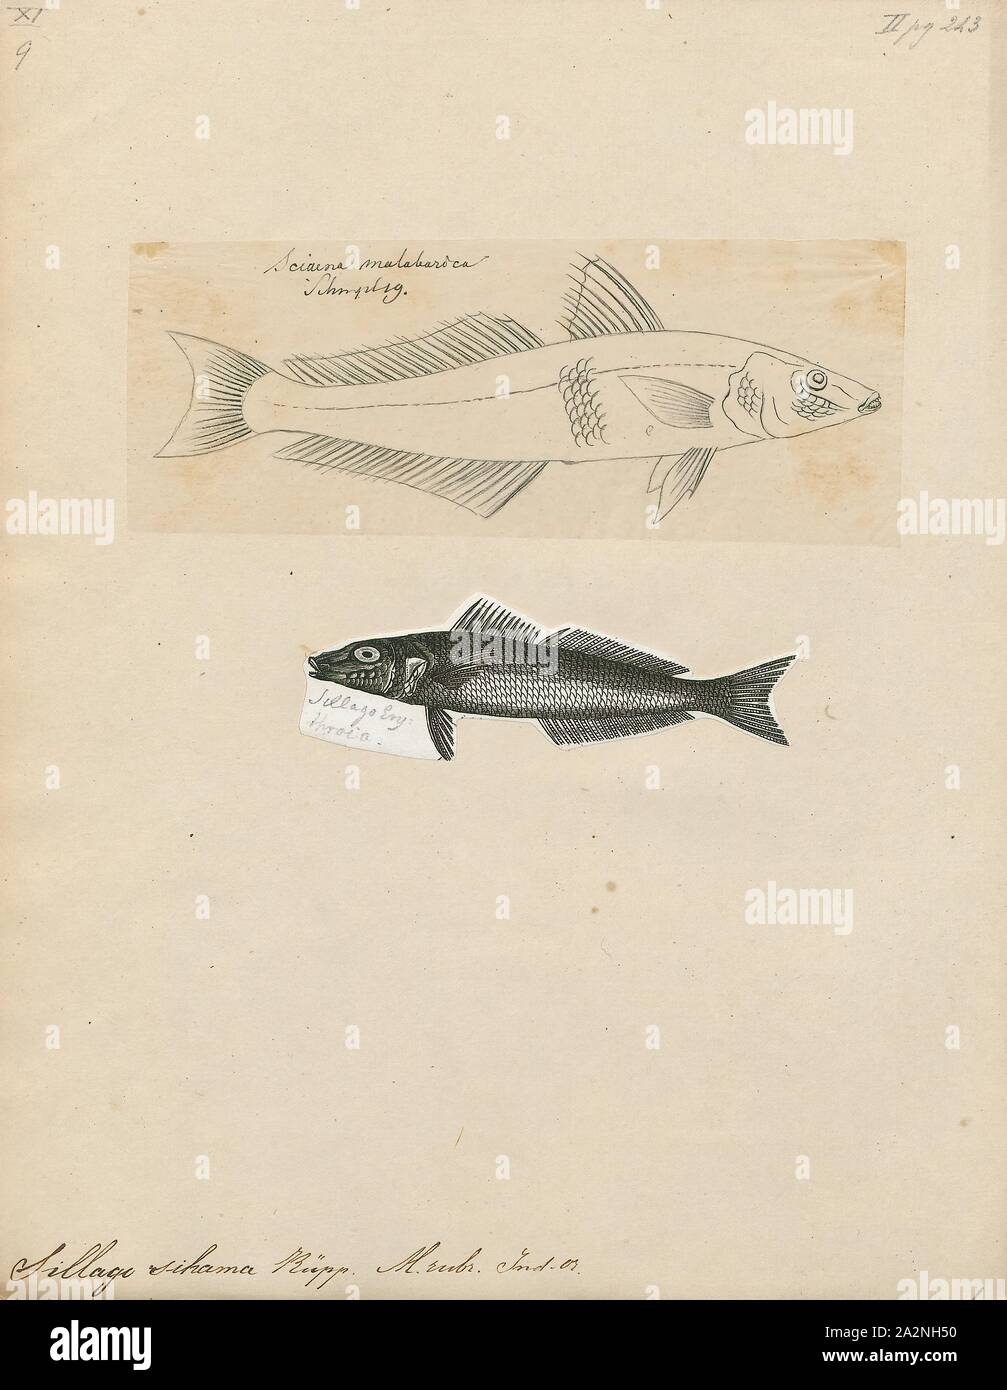 Sillago sihama, Print, The northern whiting, Sillago sihama (also known as the silver whiting and sand smelt), is a marine fish, the most widespread and abundant member of the smelt-whiting family Sillaginidae. The northern whiting was the first species of sillaginid scientifically described and is therefore the type species of both the family Sillaginidae and the genus Sillago. The species is distributed in the Indo-Pacific region from South Africa in the west to Japan and Indonesia in the east, also becoming an invasive species to the Mediterranean through the Suez Canal. The northern Stock Photo